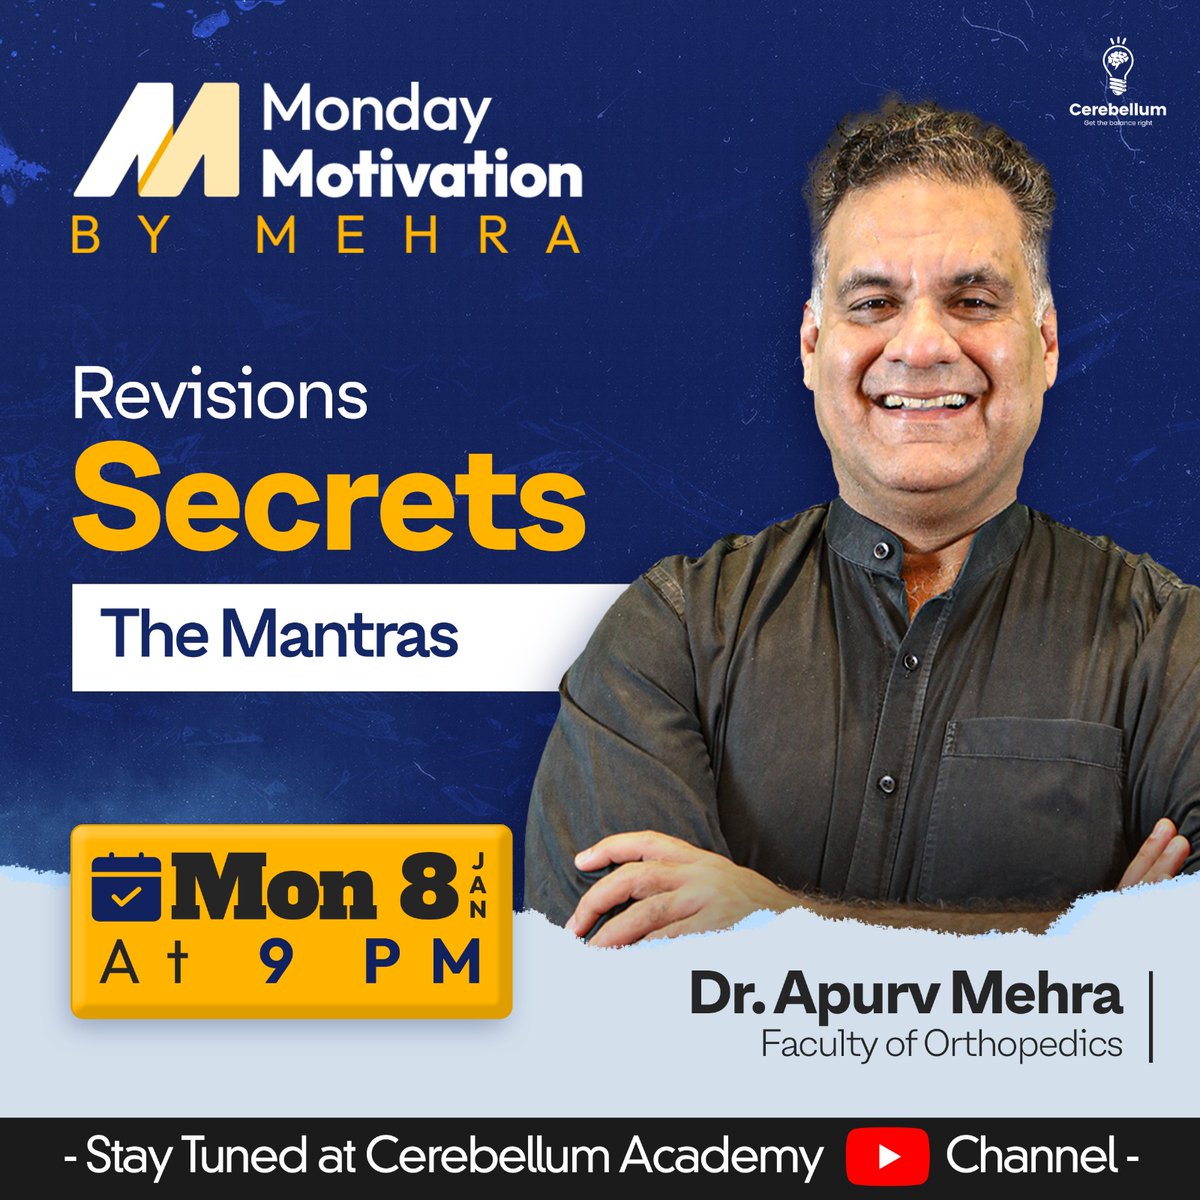 Looking for that extra boost of motivation to start your week on the right foot? Look no further! Dr Apurv Mehra is back with another incredible episode 6 of Monday Motivation by Mehra YouTube series, revealing his secret 'Revision Mantra'. 

#DrApurvMehra #MMM #CerebellumAcademy